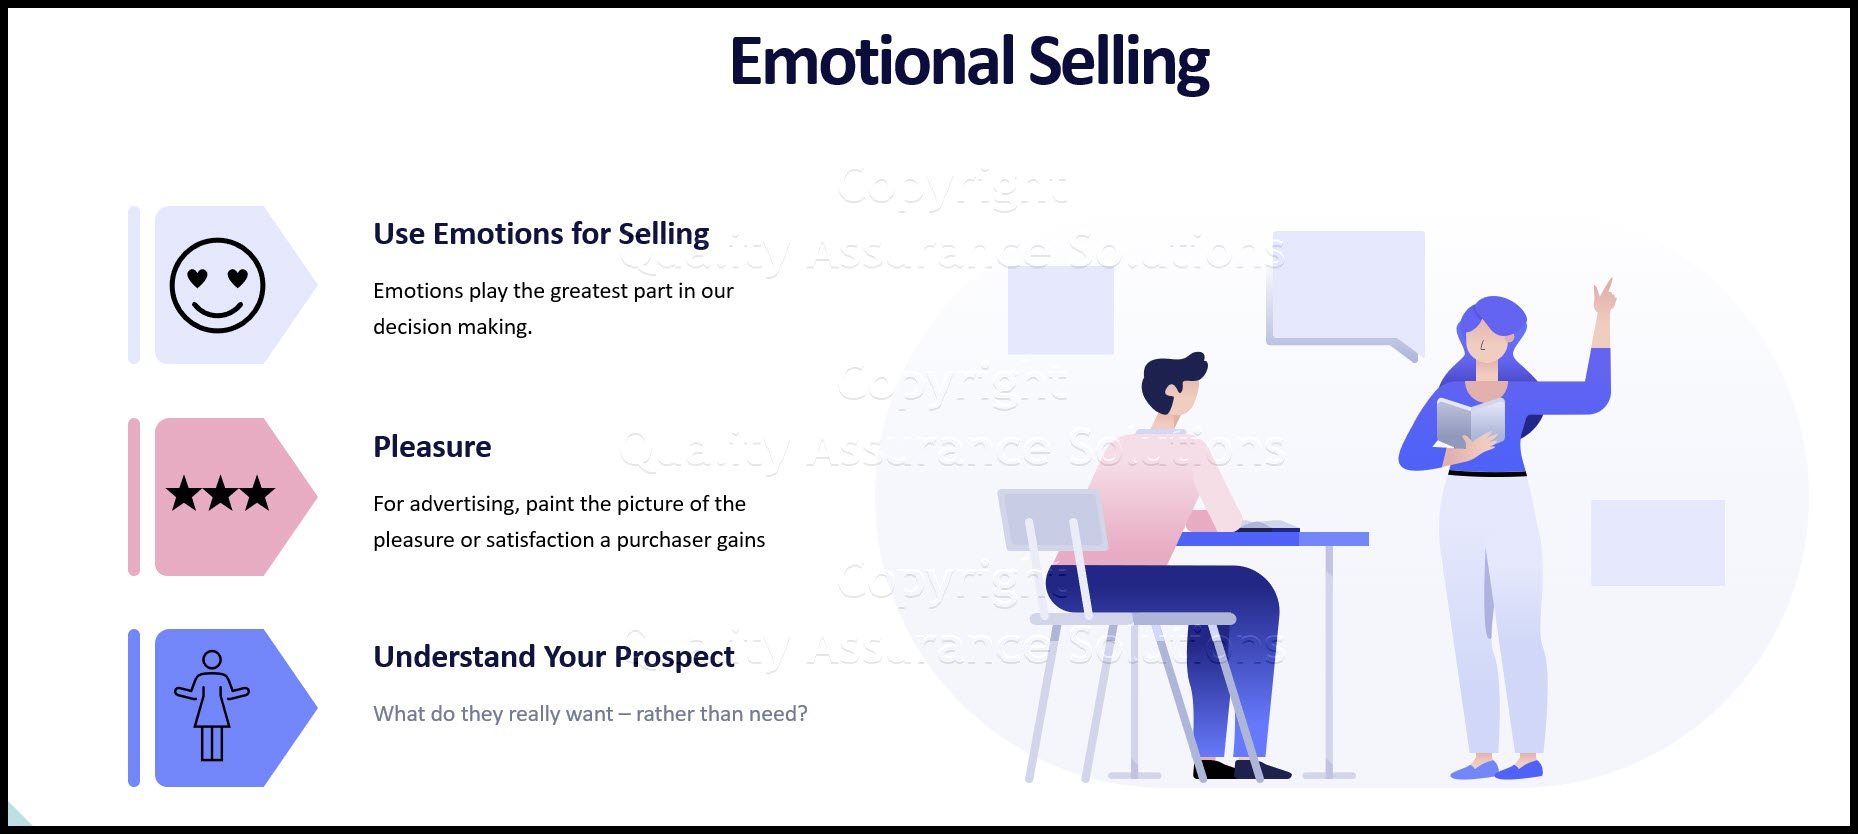 Science has proven we buy based on emotion and apply logic after the purchase. So, as businesses we need to create offers with emotional selling techniques